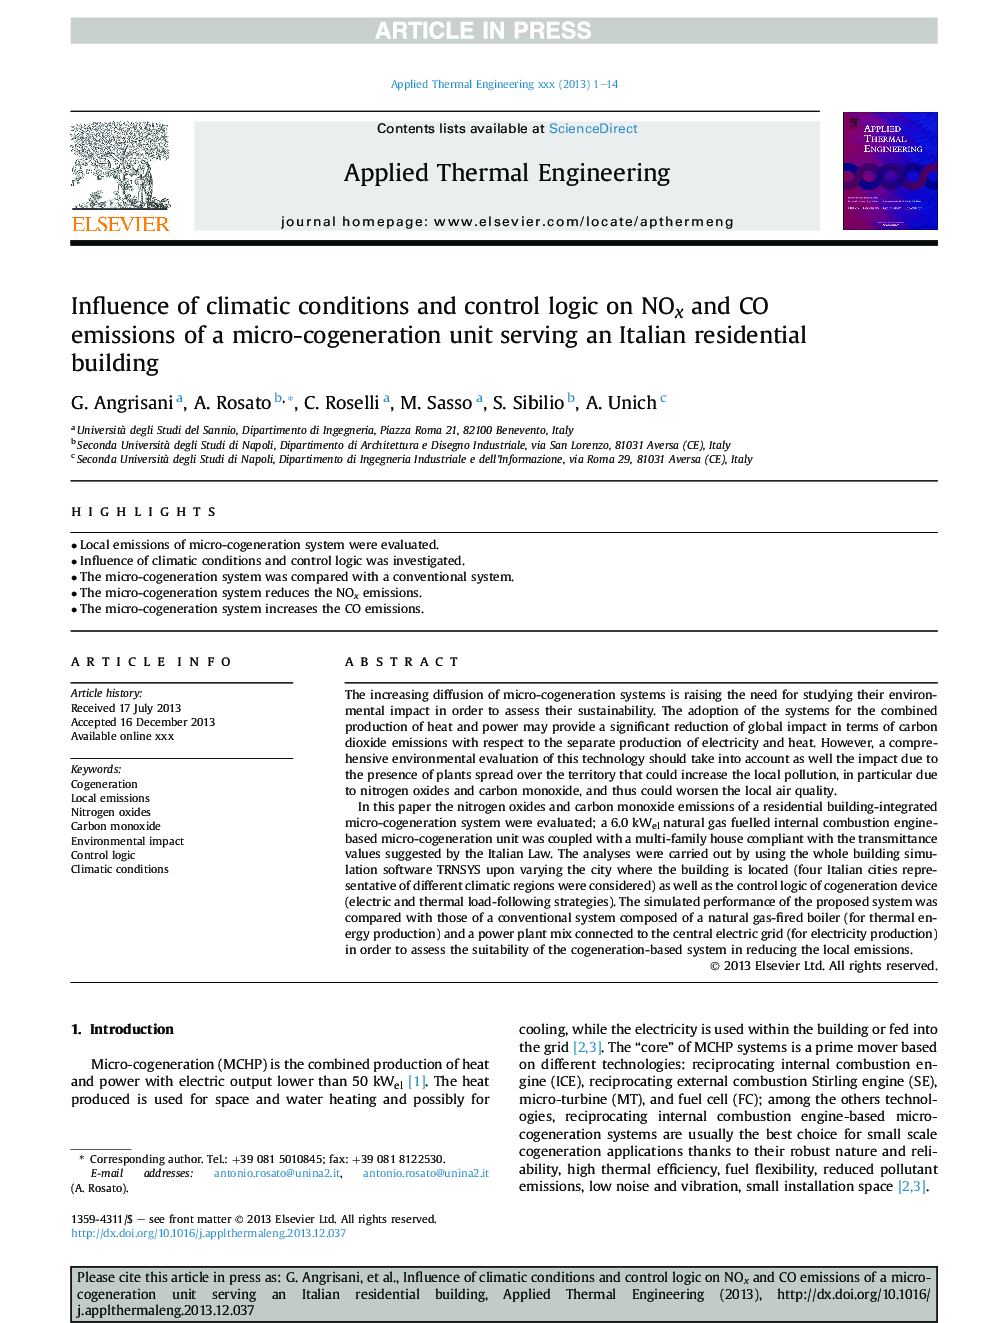 Influence of climatic conditions and control logic on NOx and CO emissions of a micro-cogeneration unit serving an Italian residential building